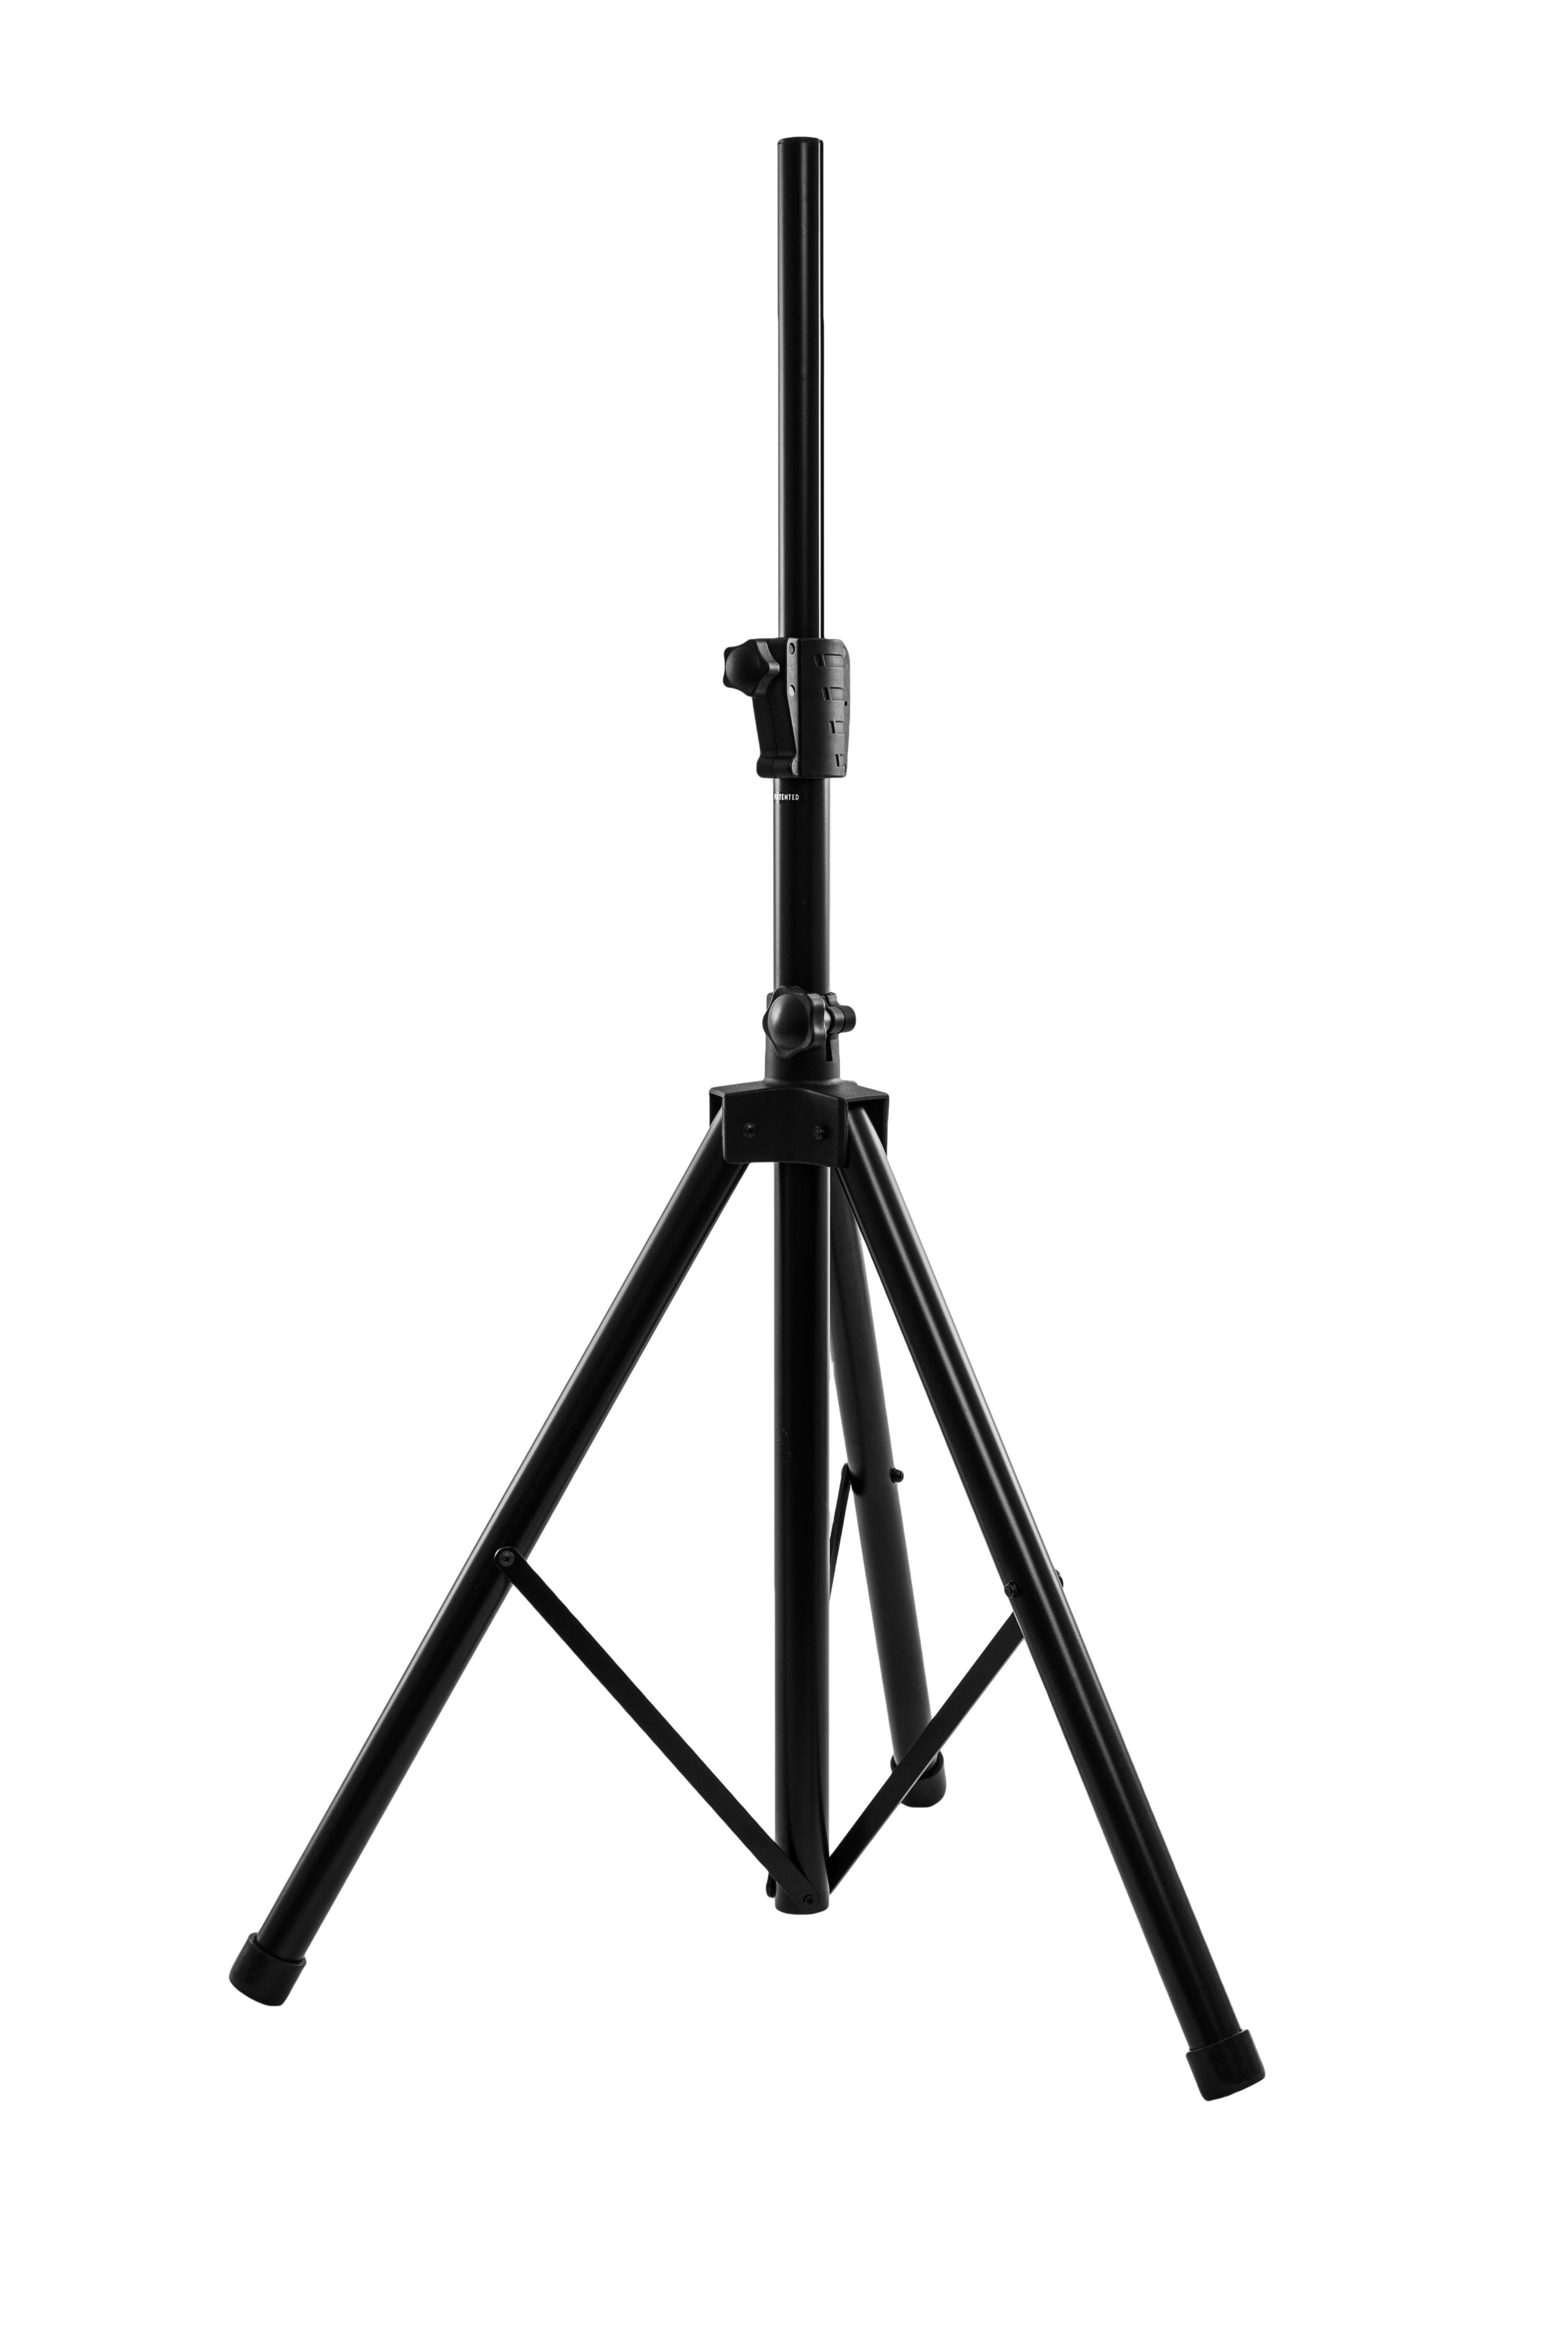 Nomad NSS-8601 Pneumatic Speaker Stand